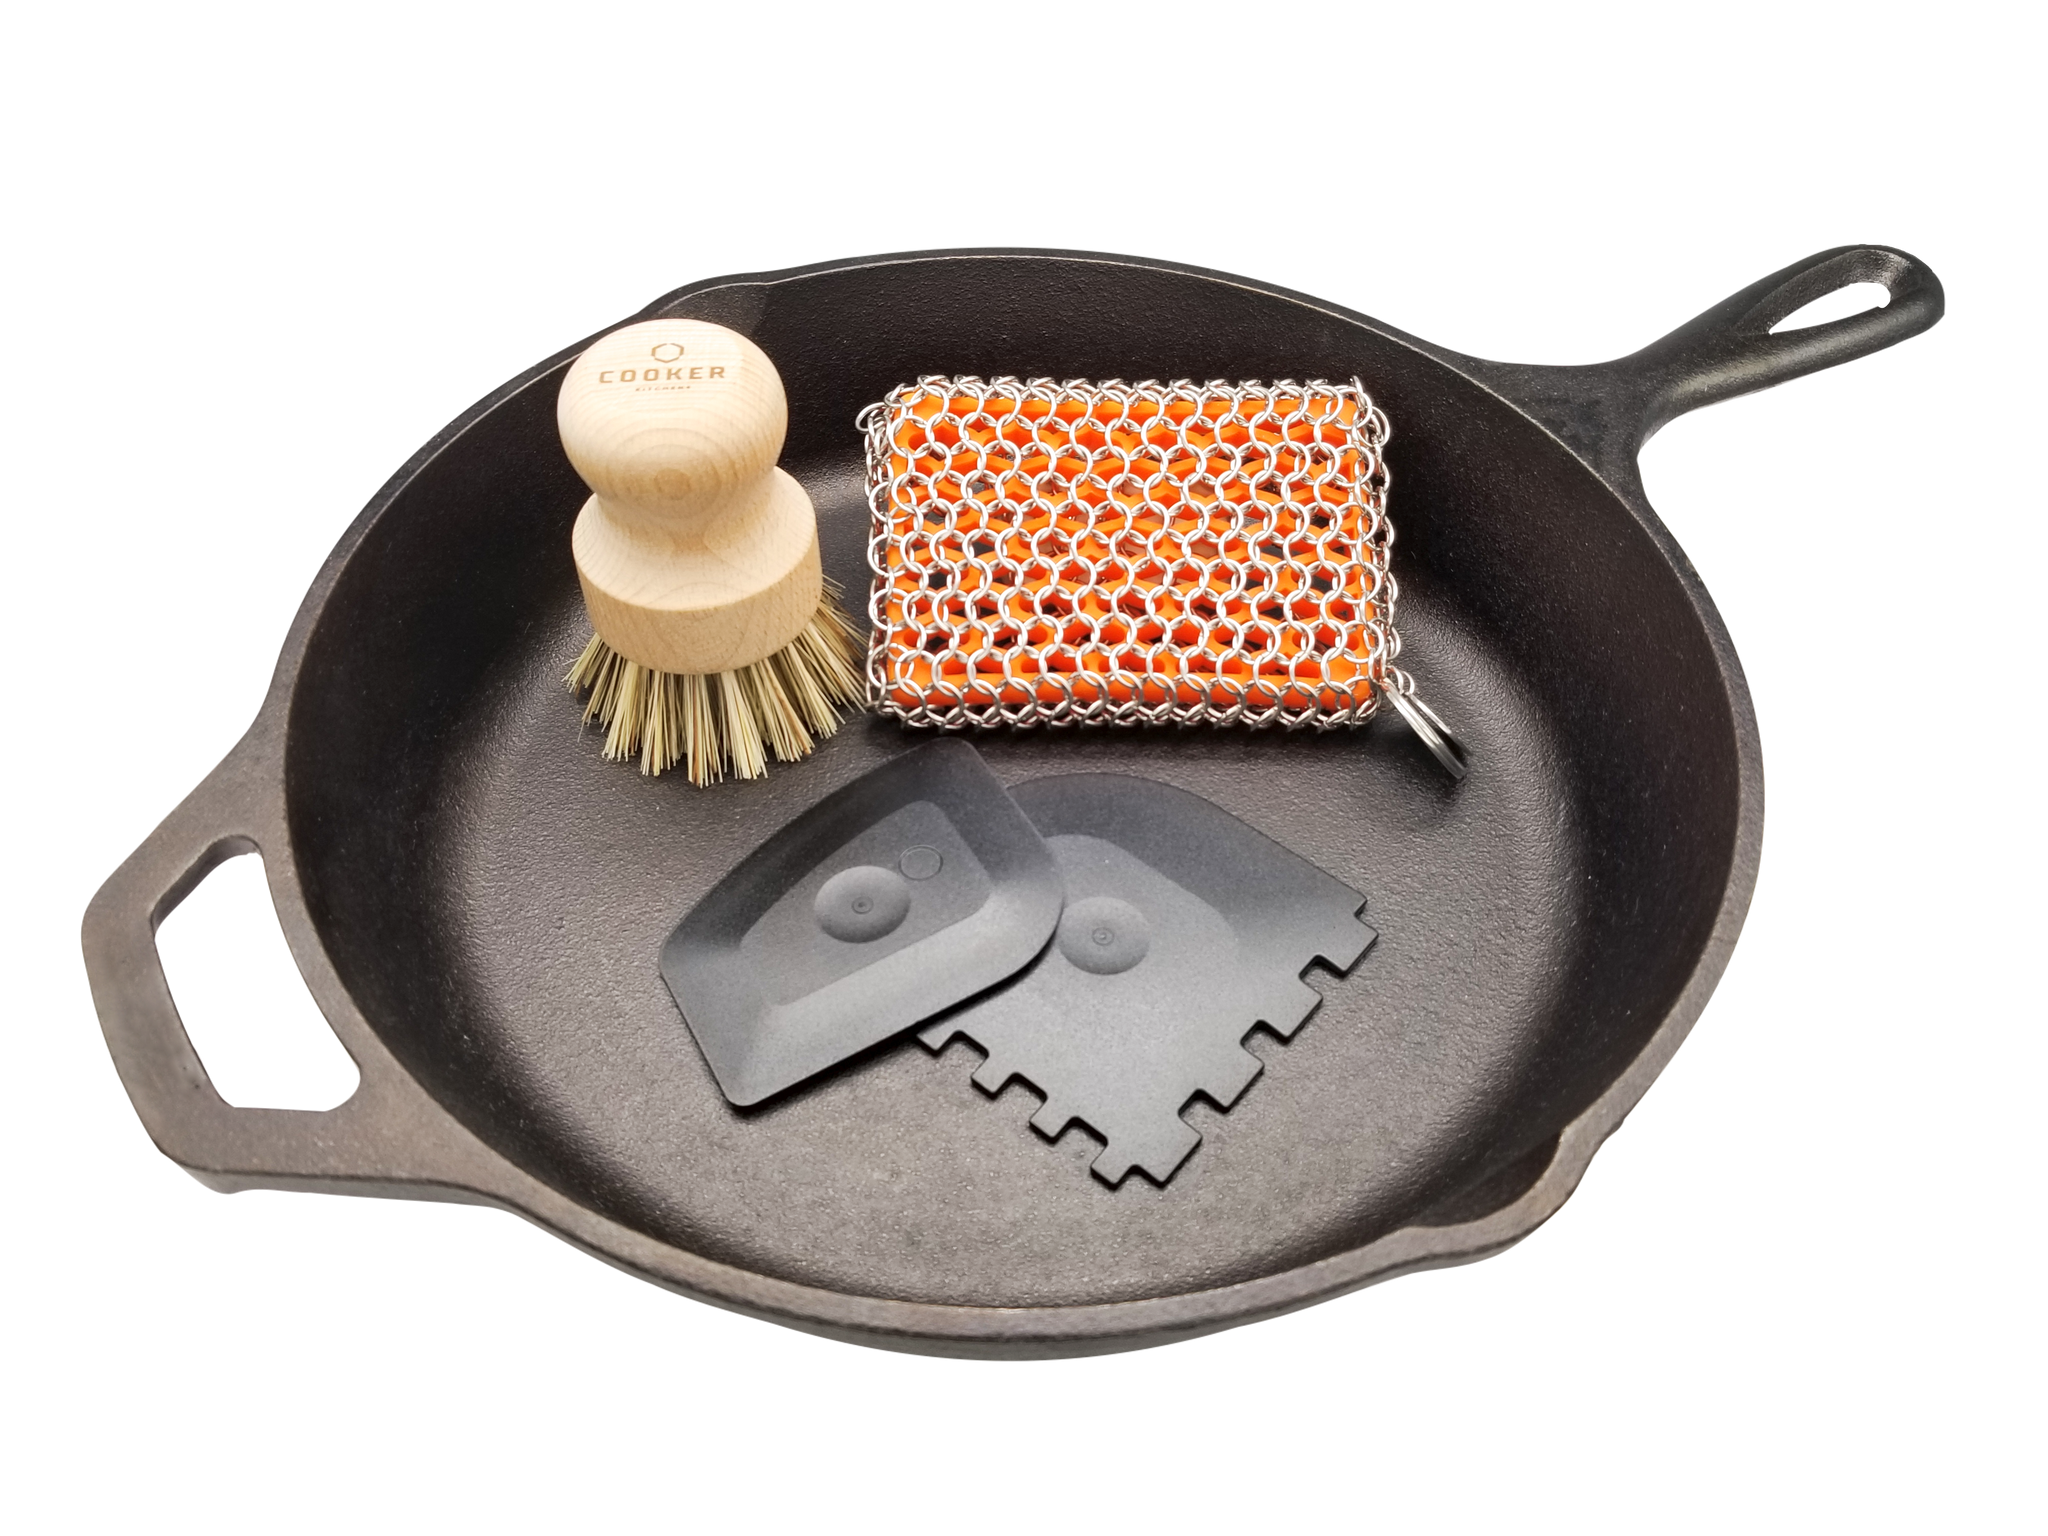 Cast Iron Skillet Cleaning Kit (4 pieces) - Available in 5 Color Combos